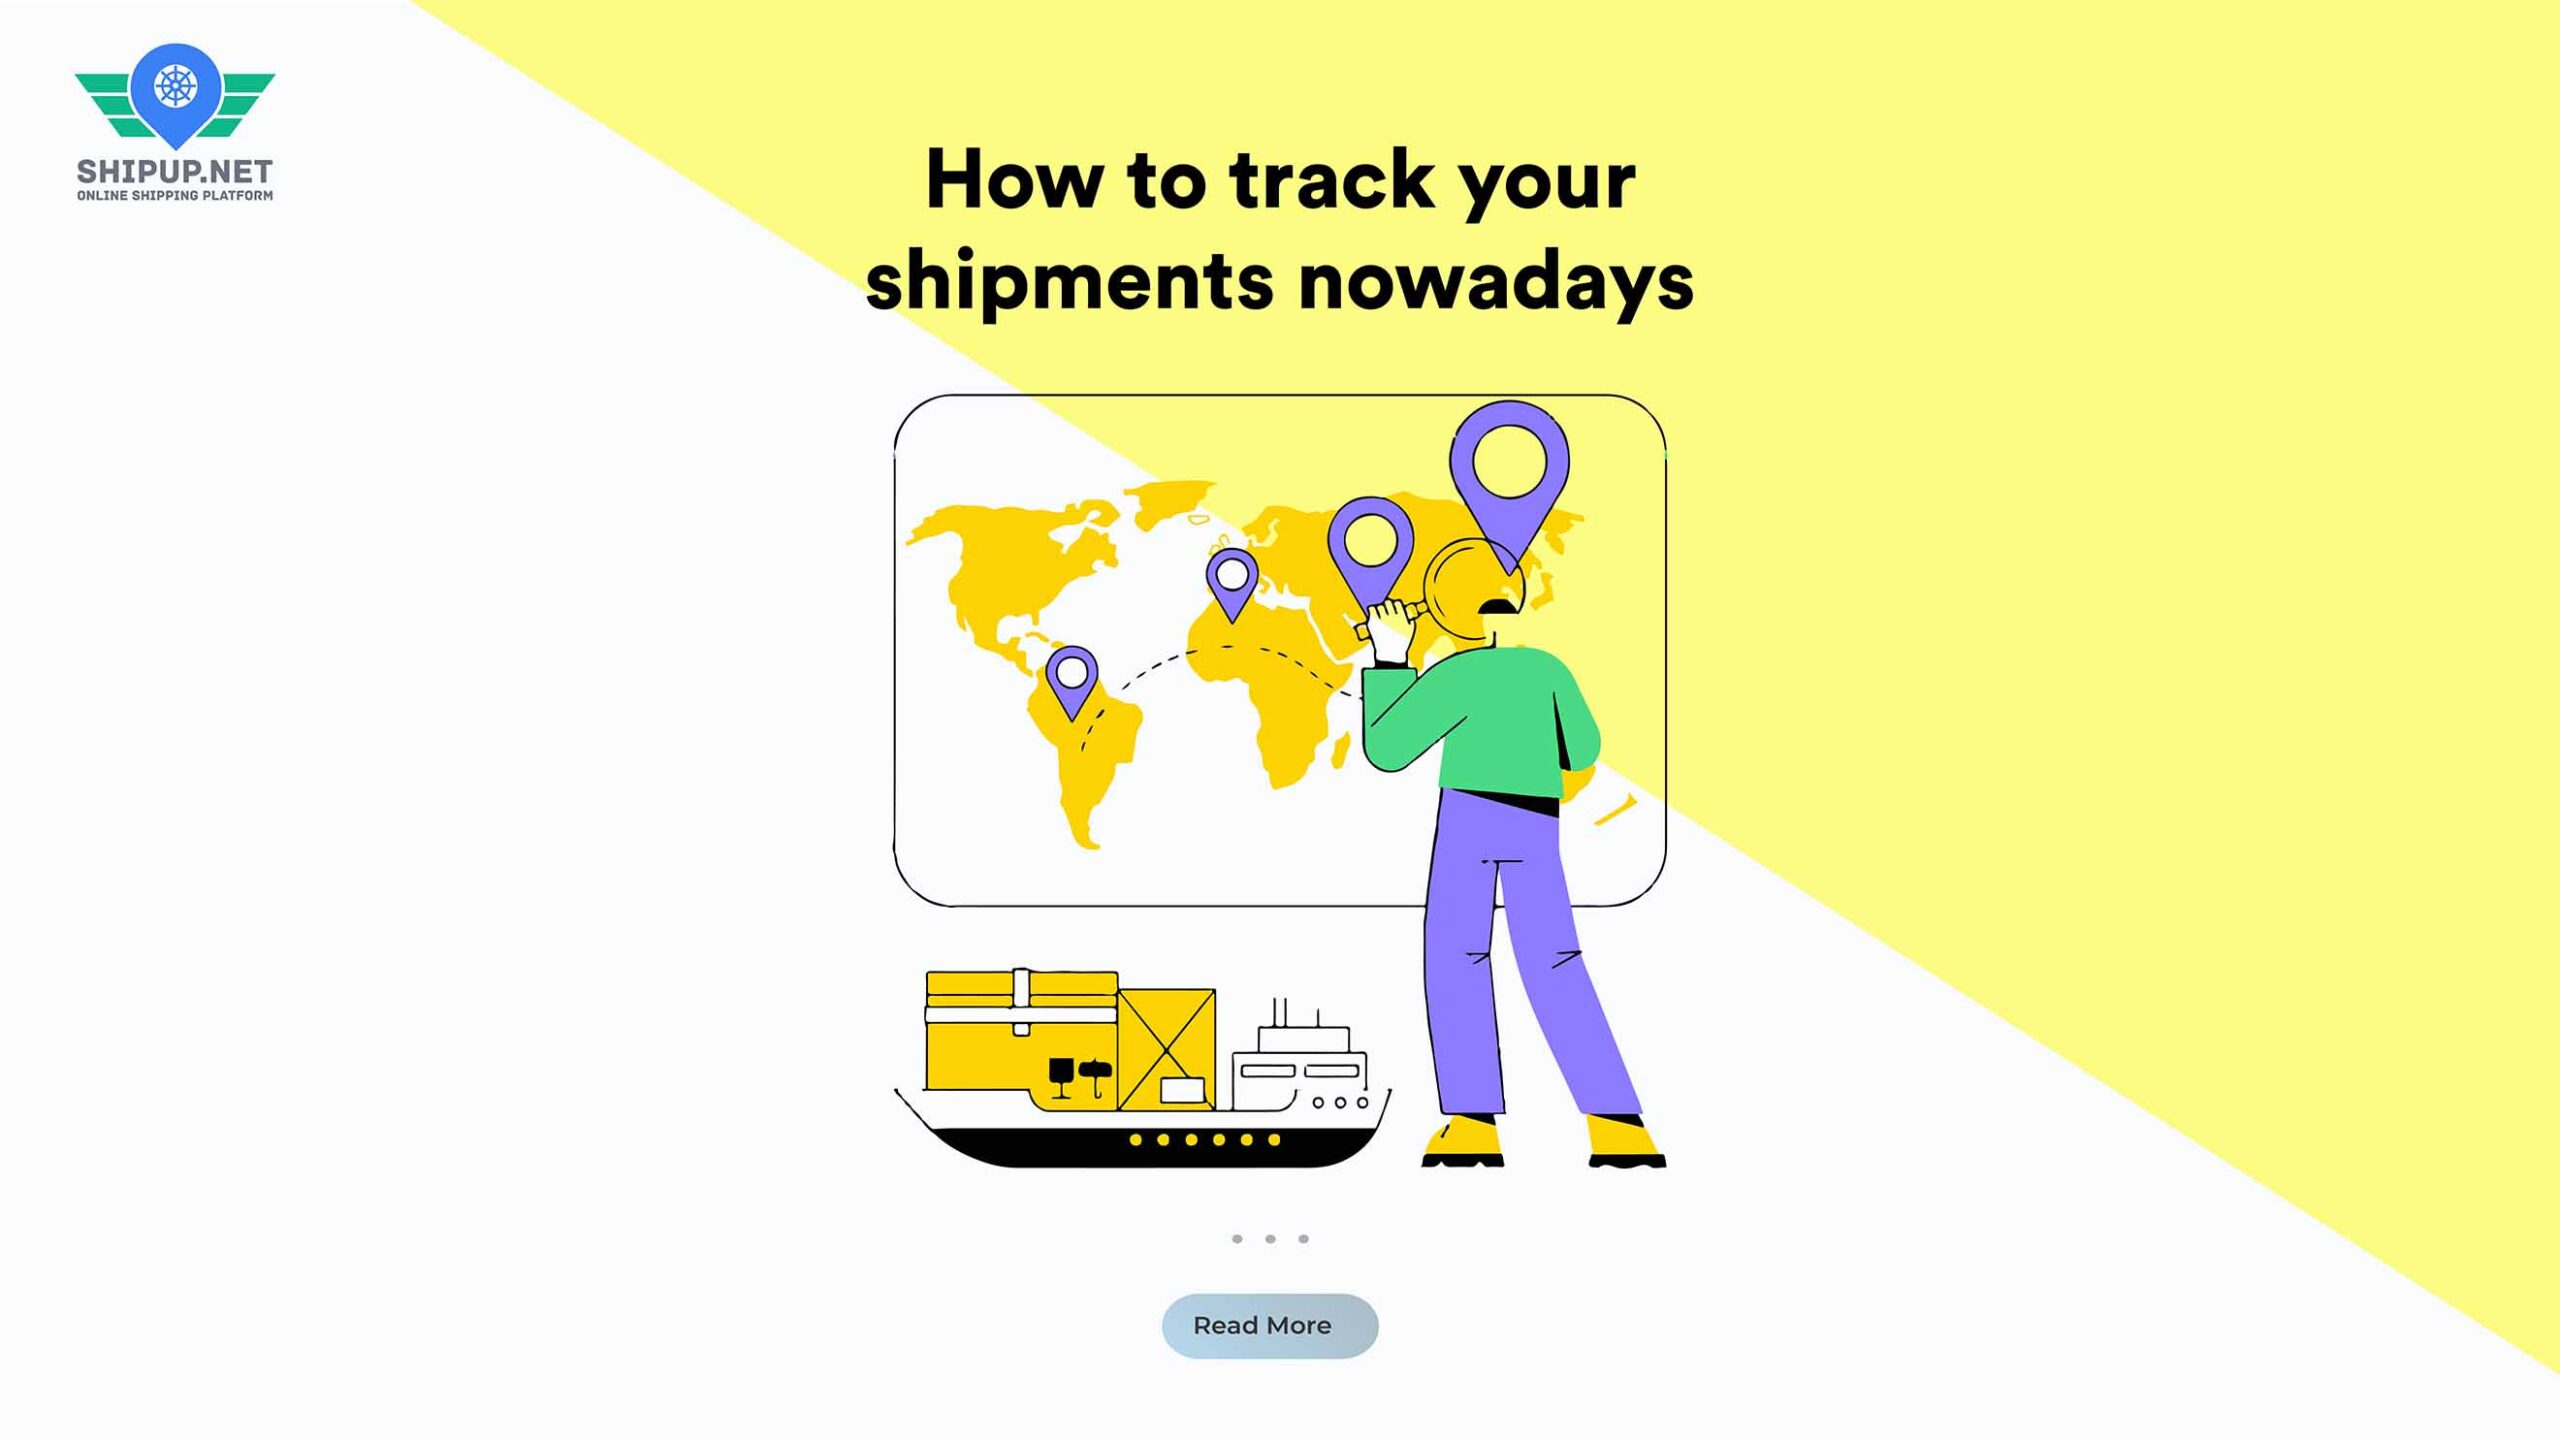 How to track your shipments nowadays